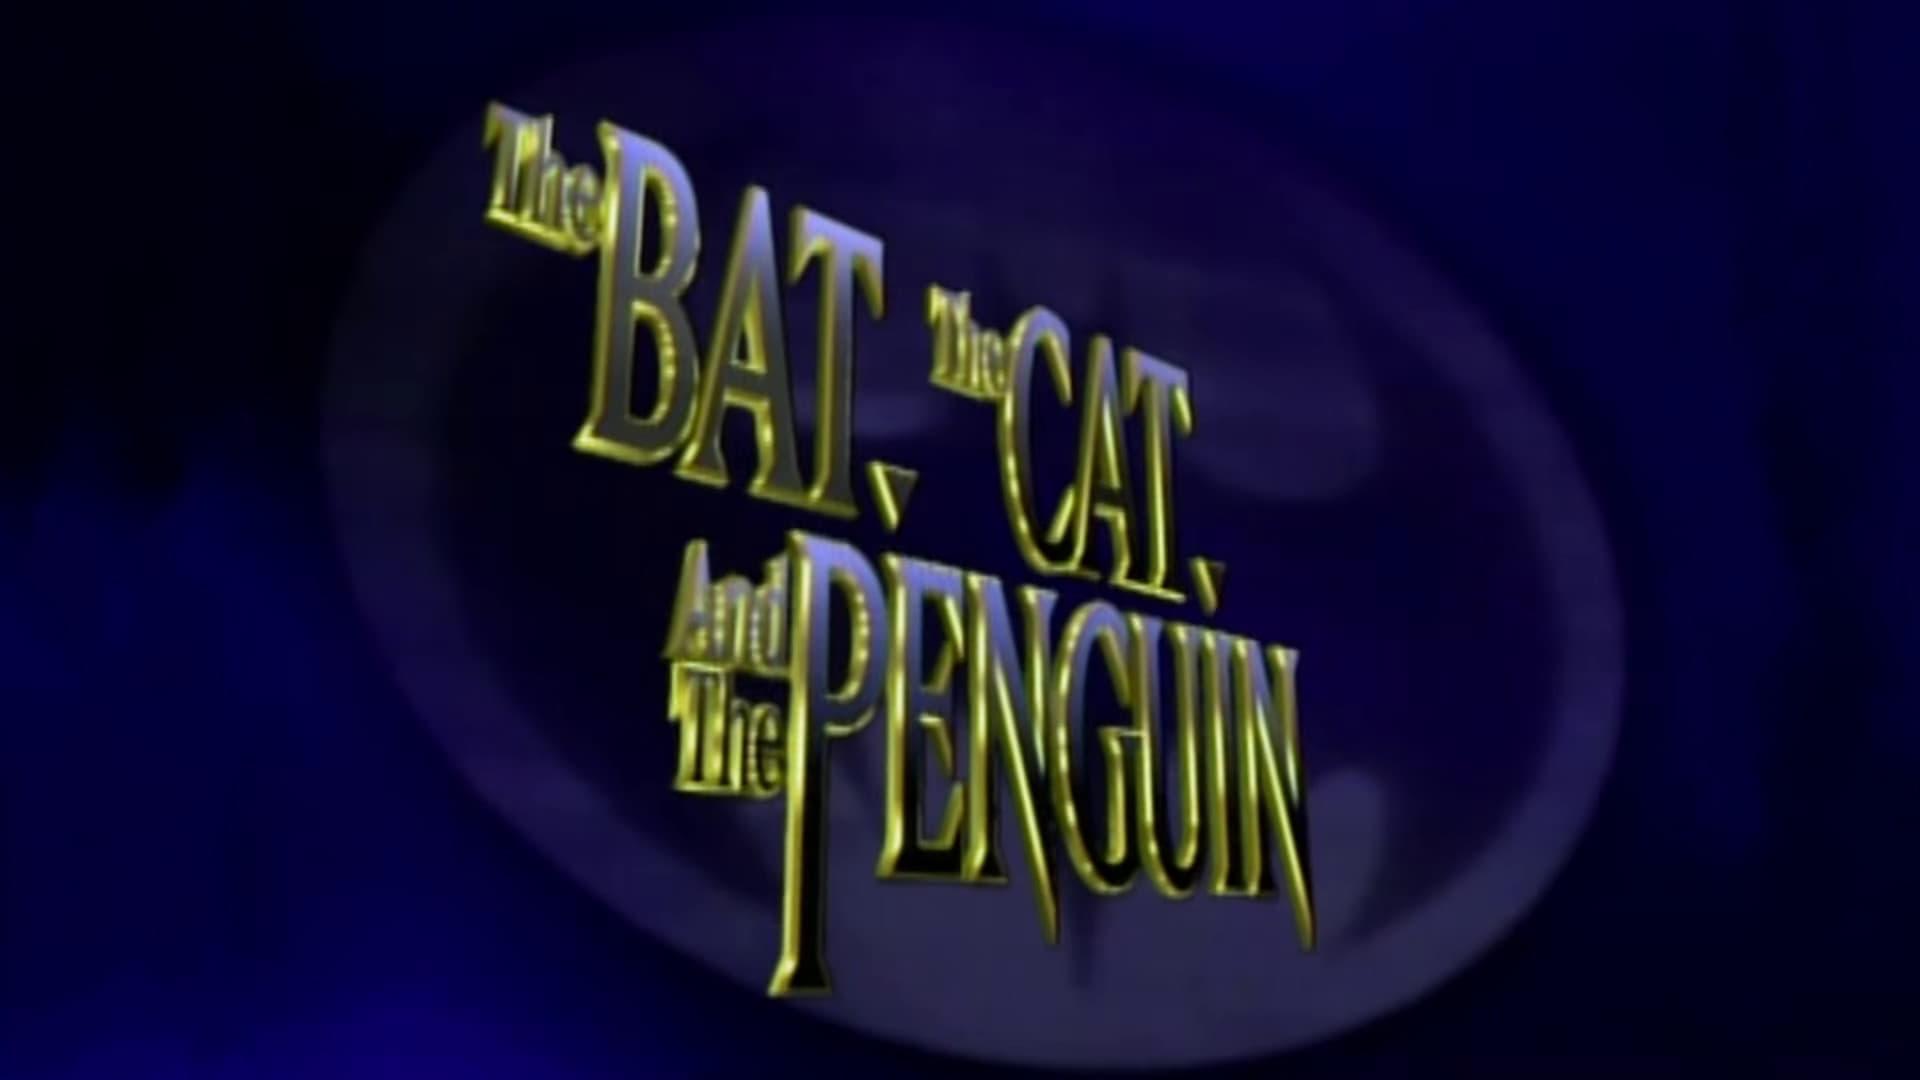 The Bat, the Cat, and the Penguin backdrop